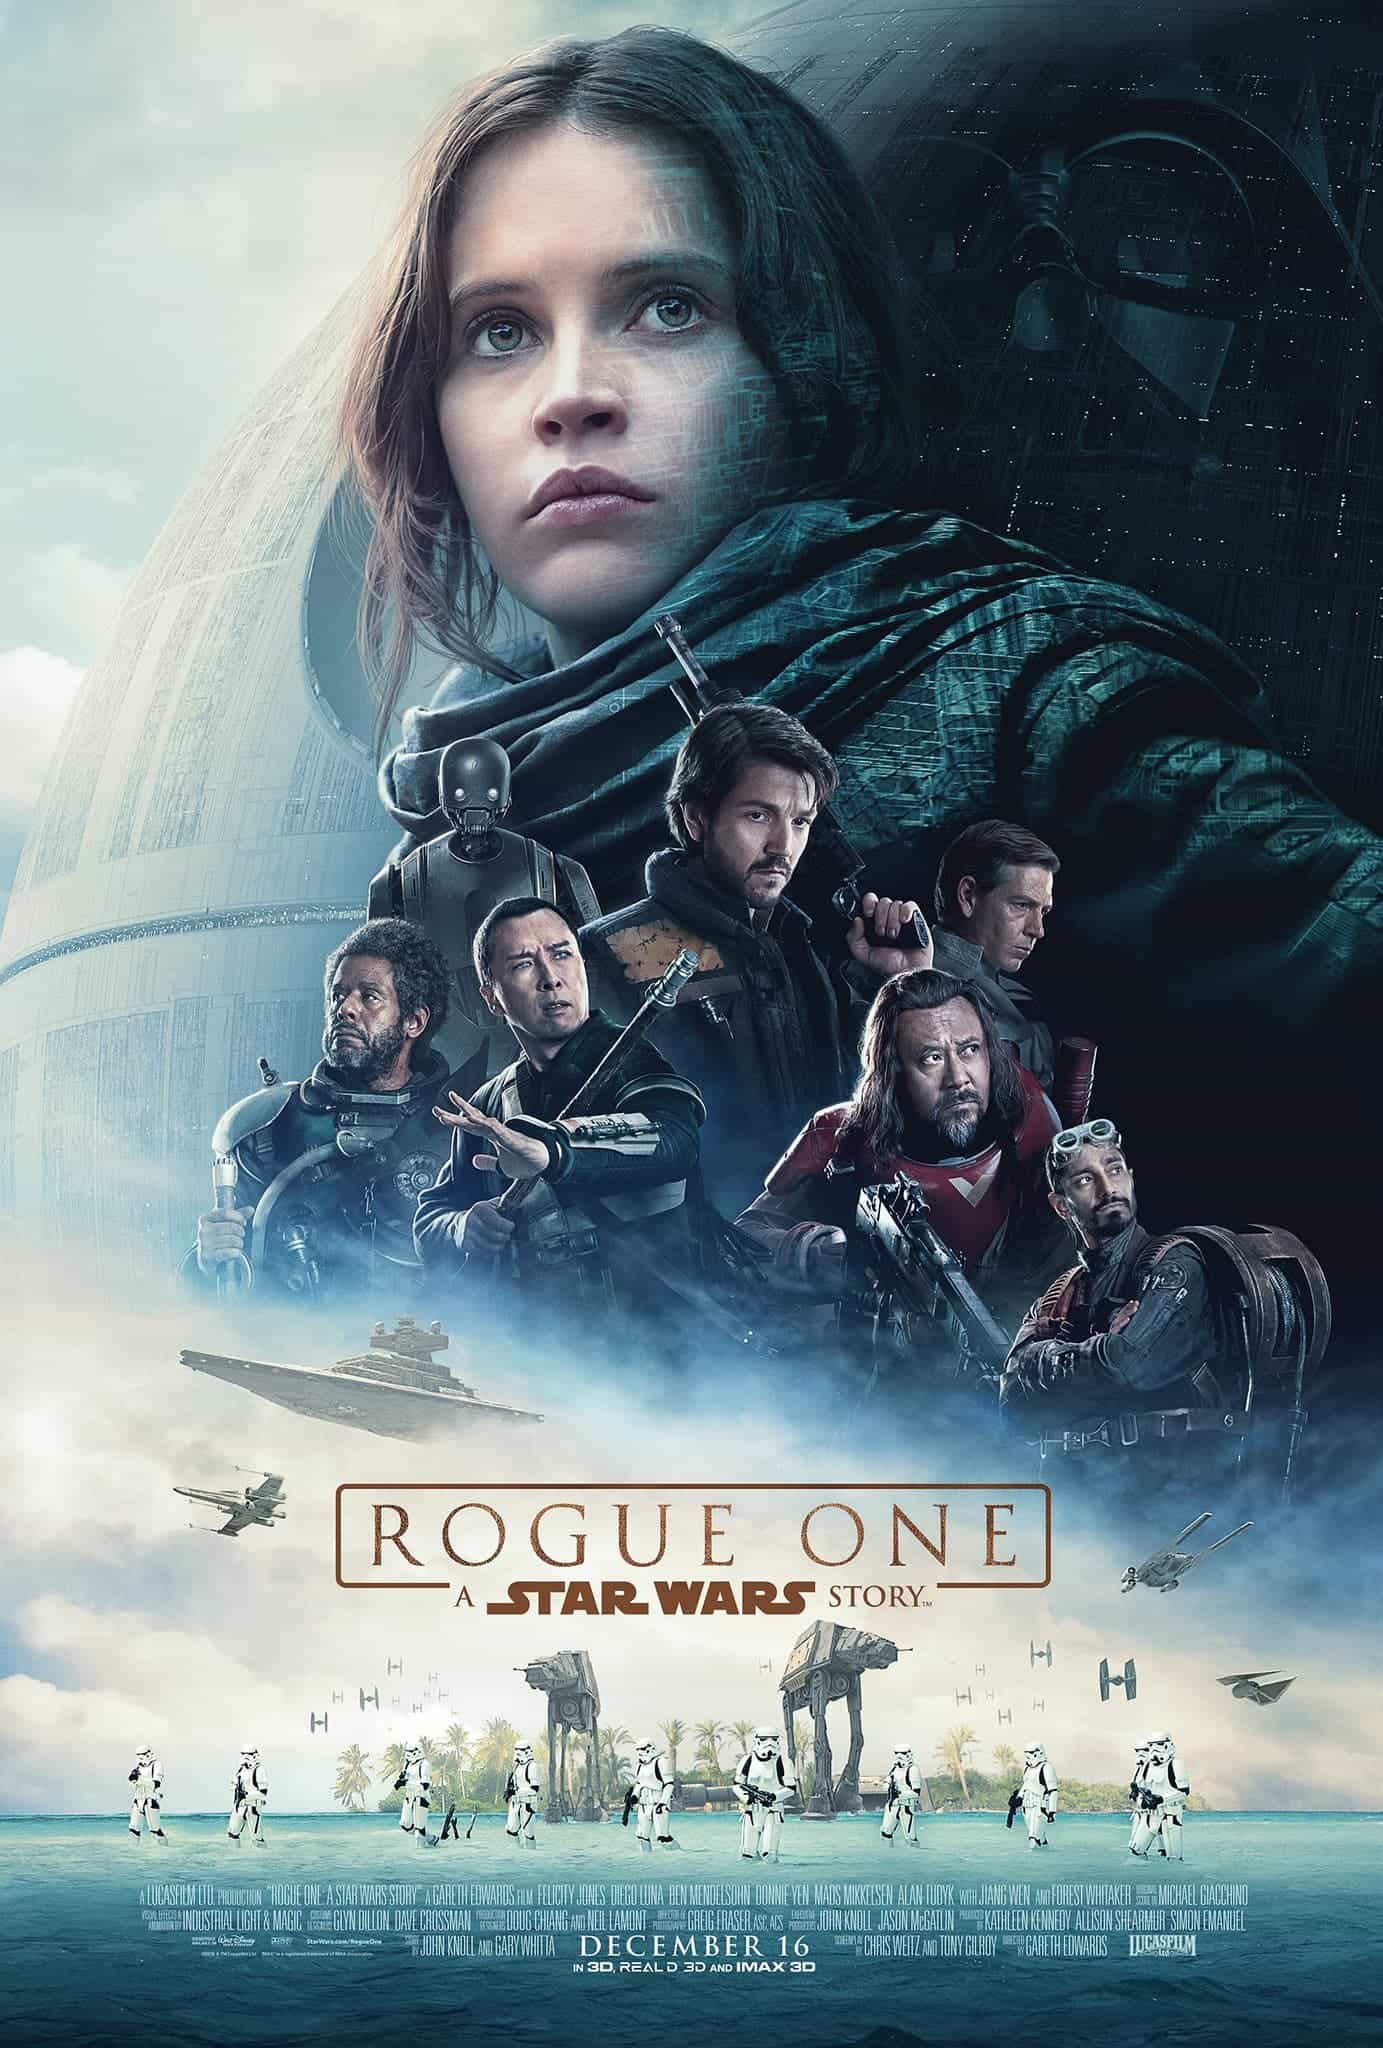 UK Box Office Weekend 16th December 2016:  Rogue One opens big but not as big as The Force Awakens last year